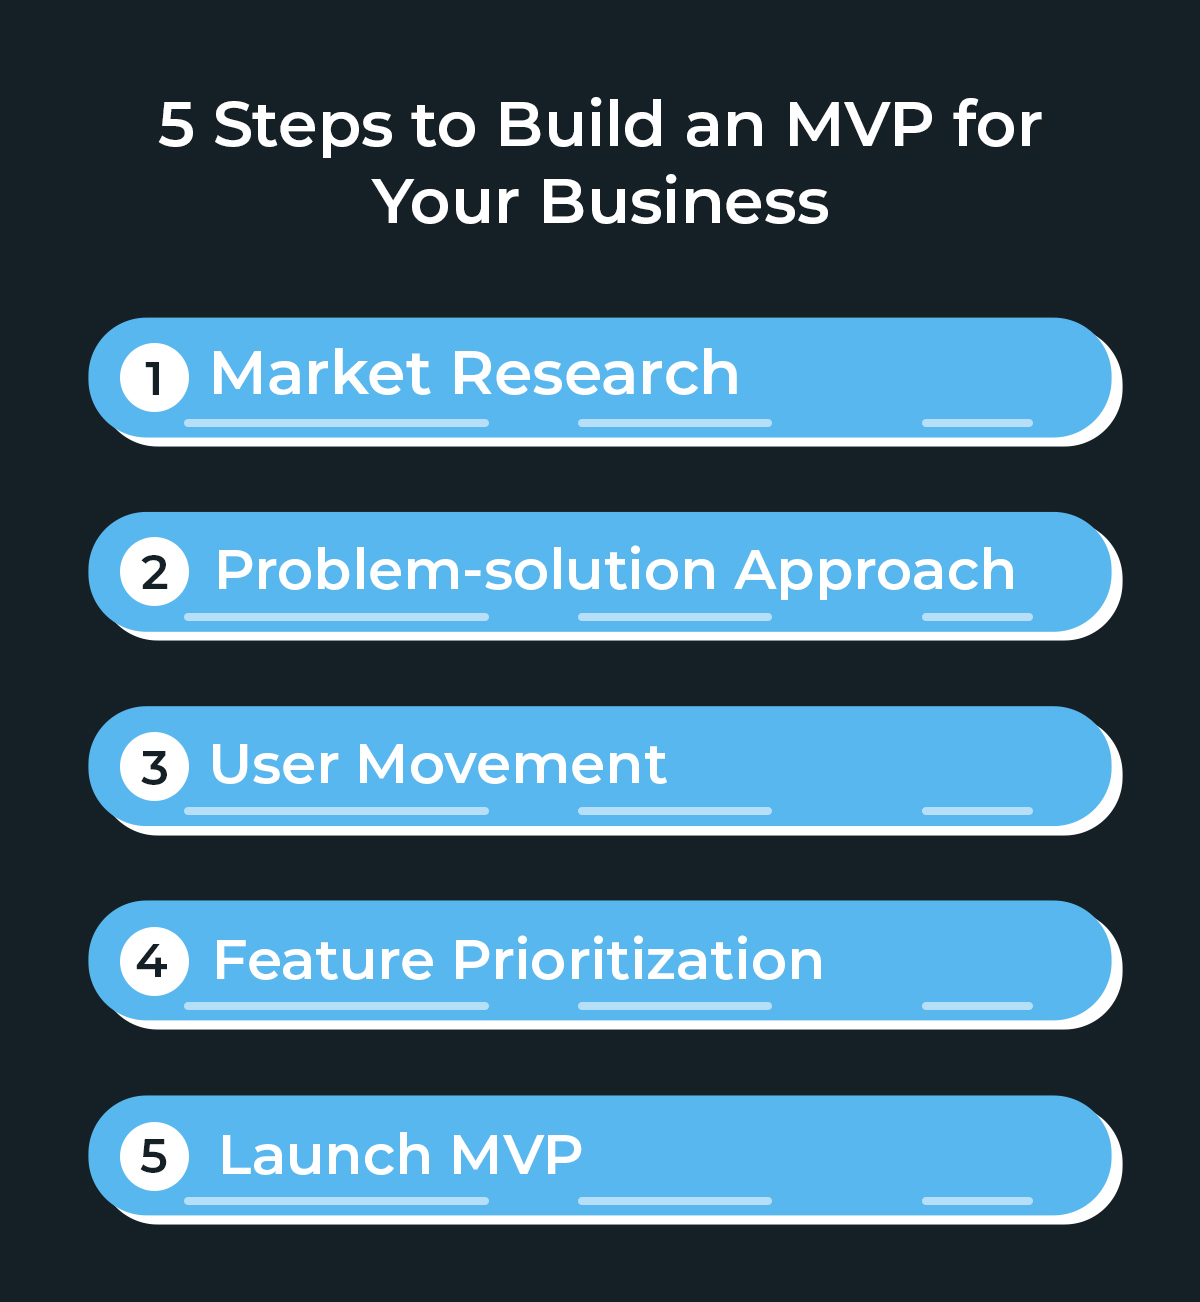 5 Steps to Build an MVP for Your Business